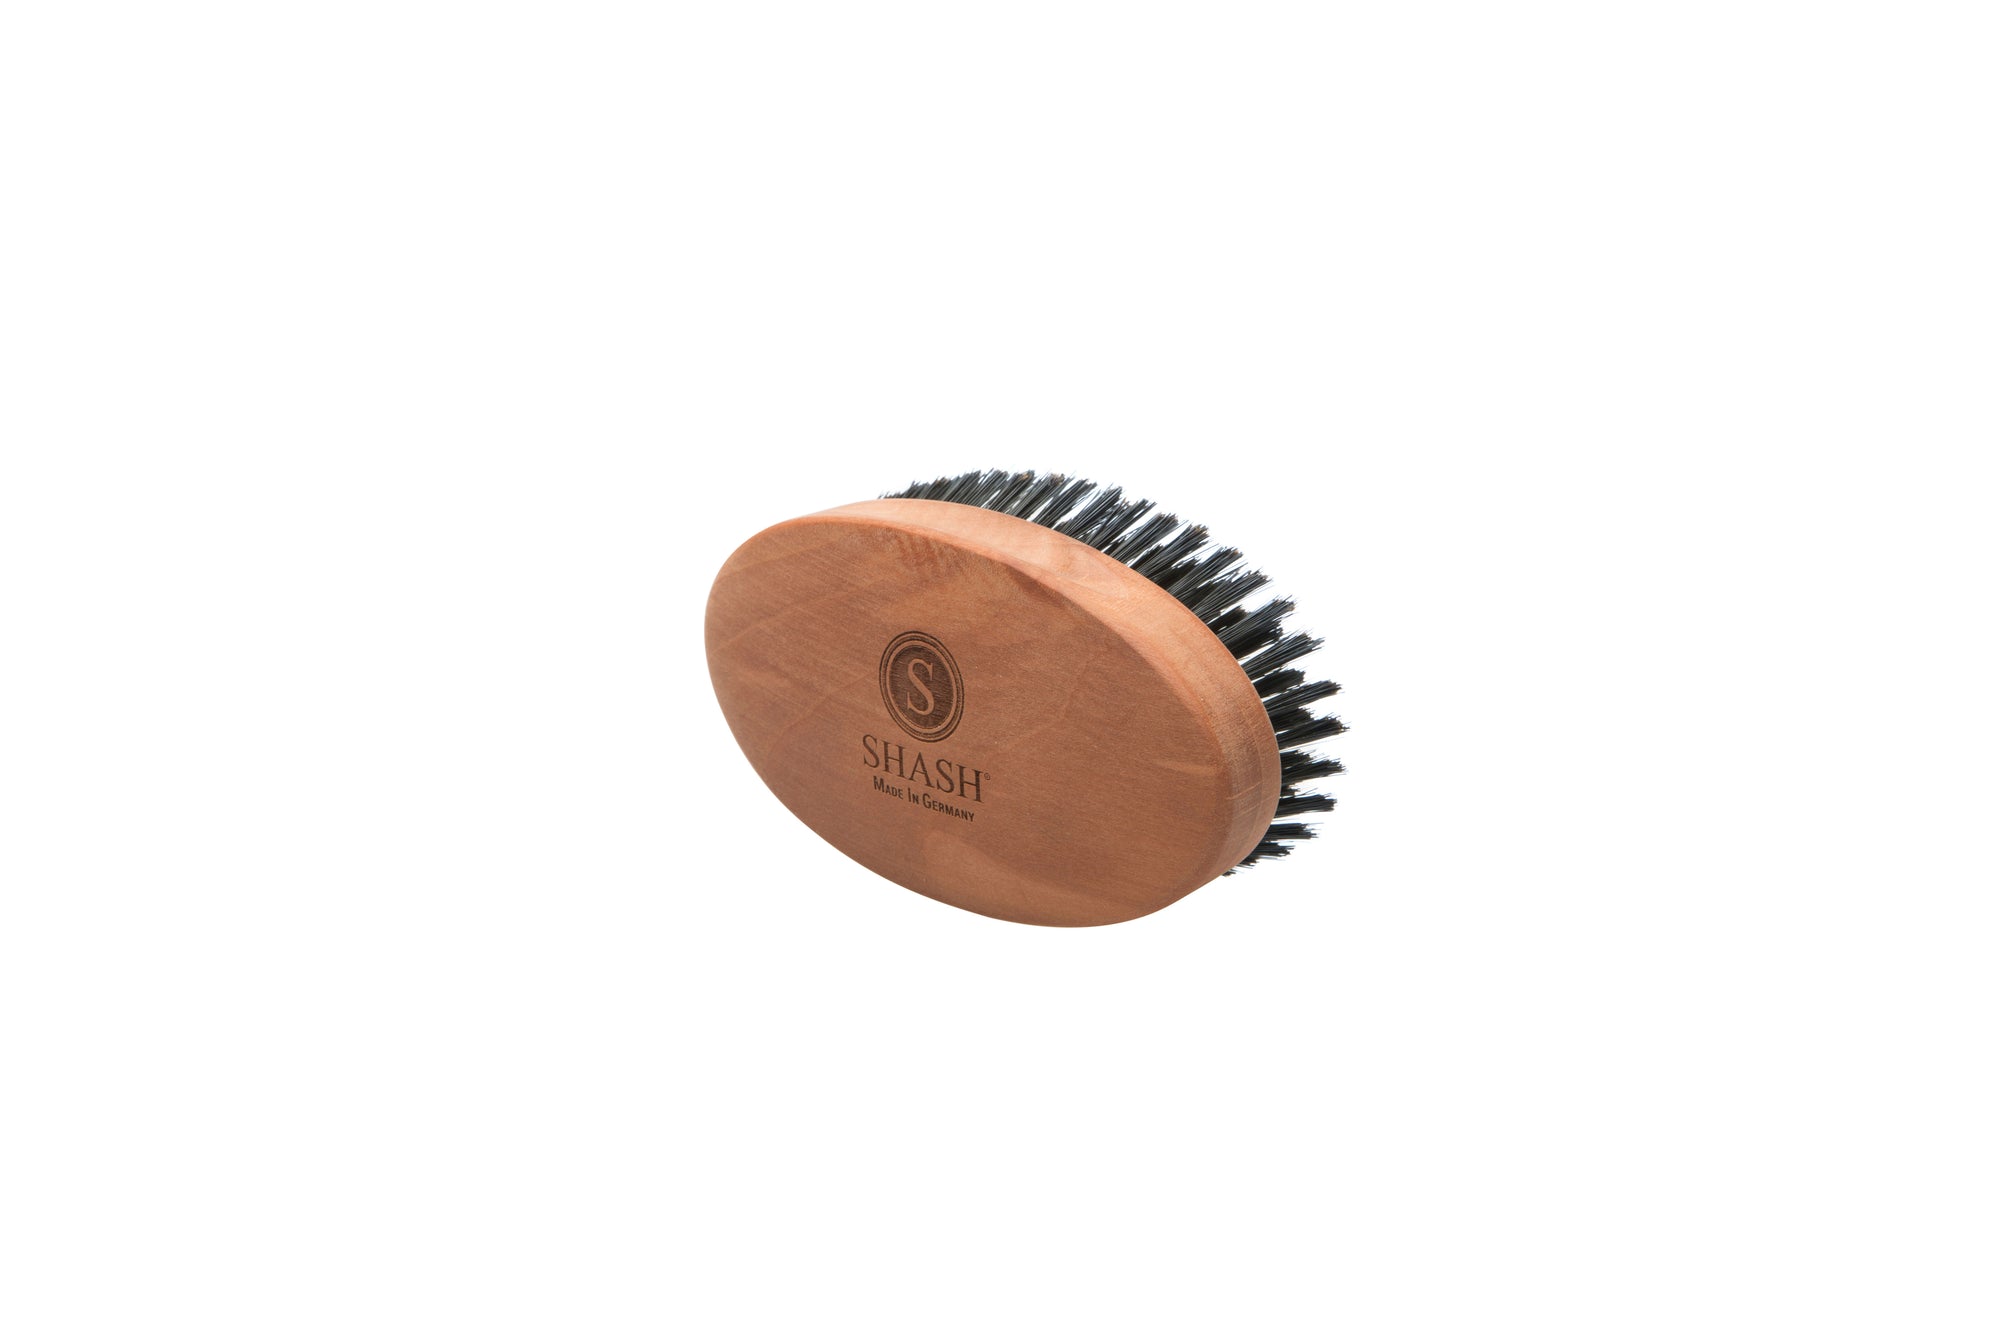 Since 1869 Hand Made In Germany 100% Boar Bristle Hair Brush - Naturally Conditions, Improves Texture, and Stimulates the Scalp | Ideal for Thin to Normal Hair